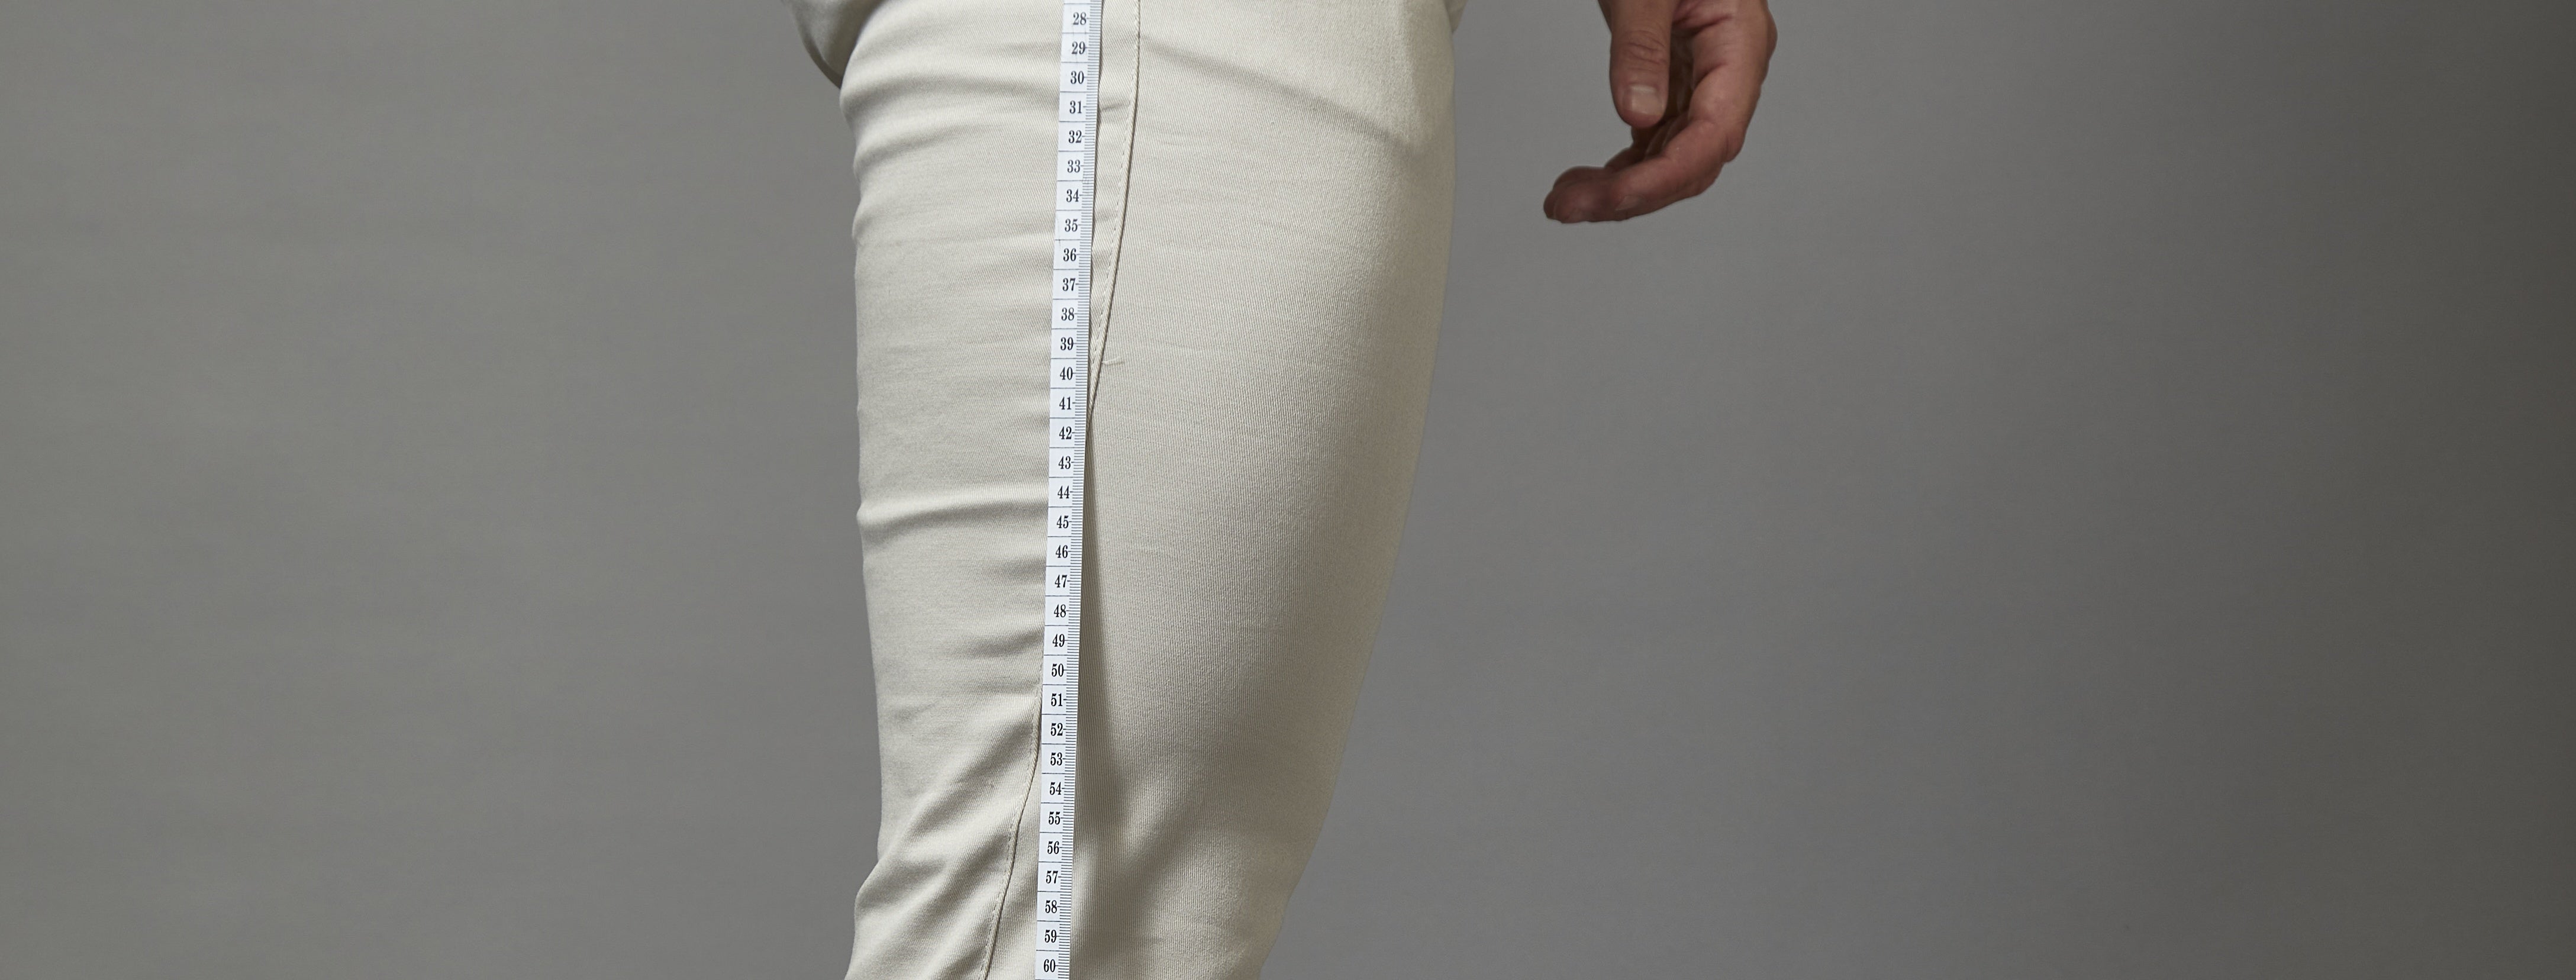 How To Measure Pant and Trouser Length For Men